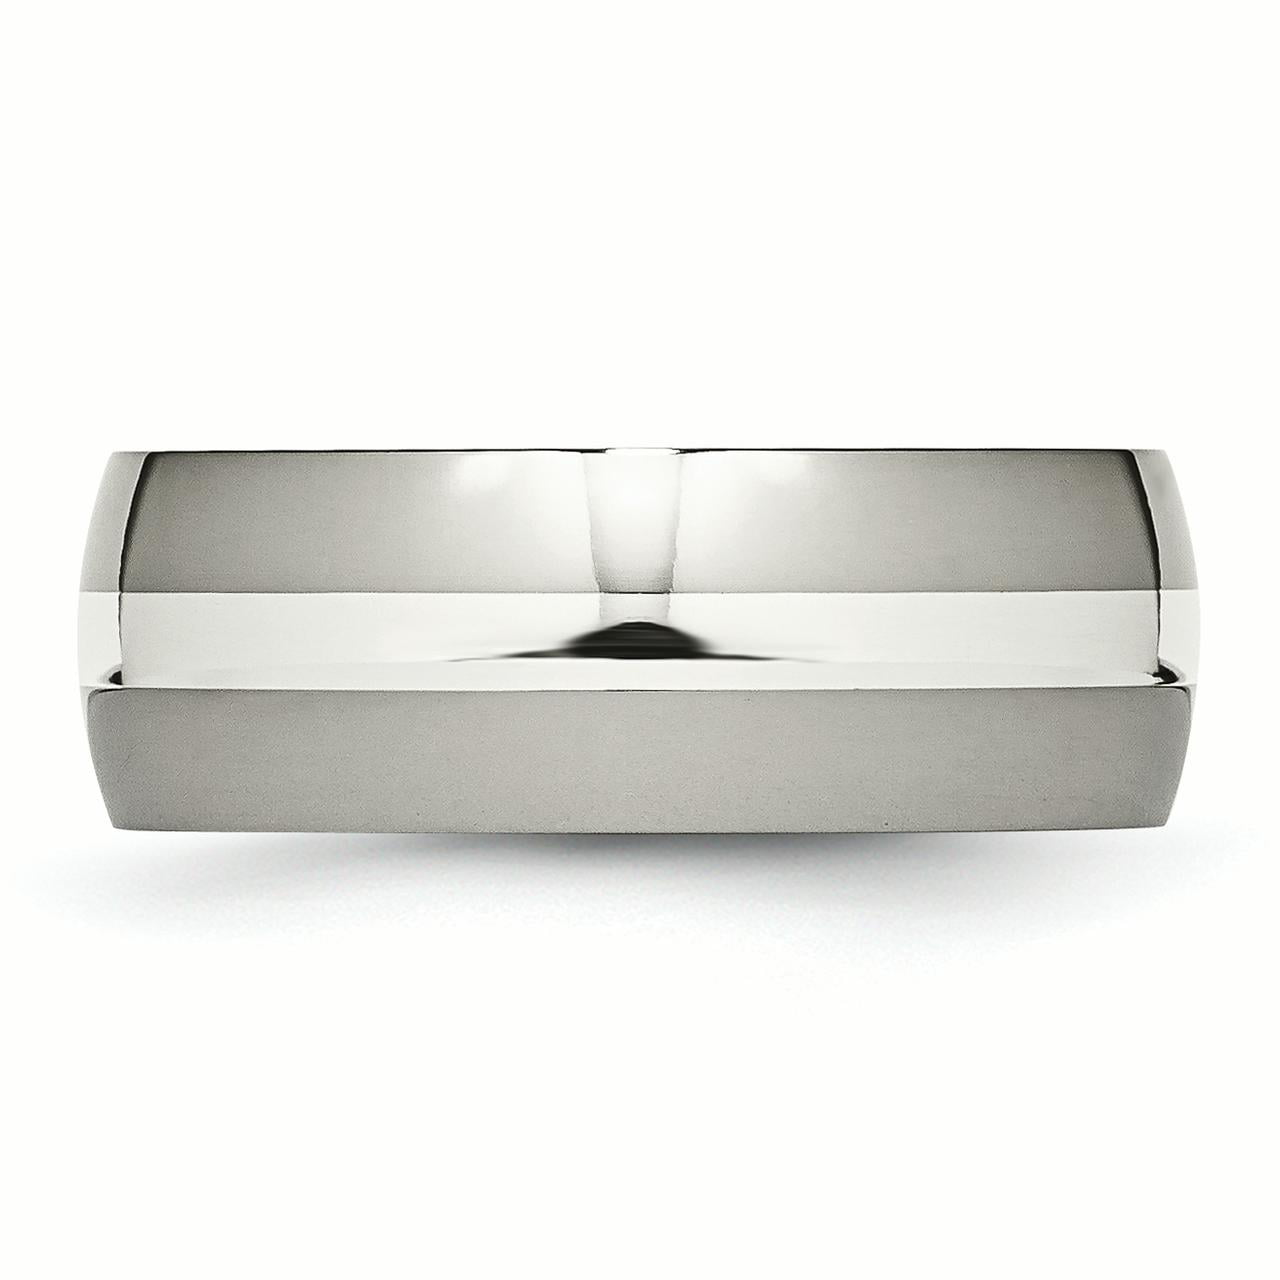 Titanium Sterling Silver Inlay 8mm Polished Band